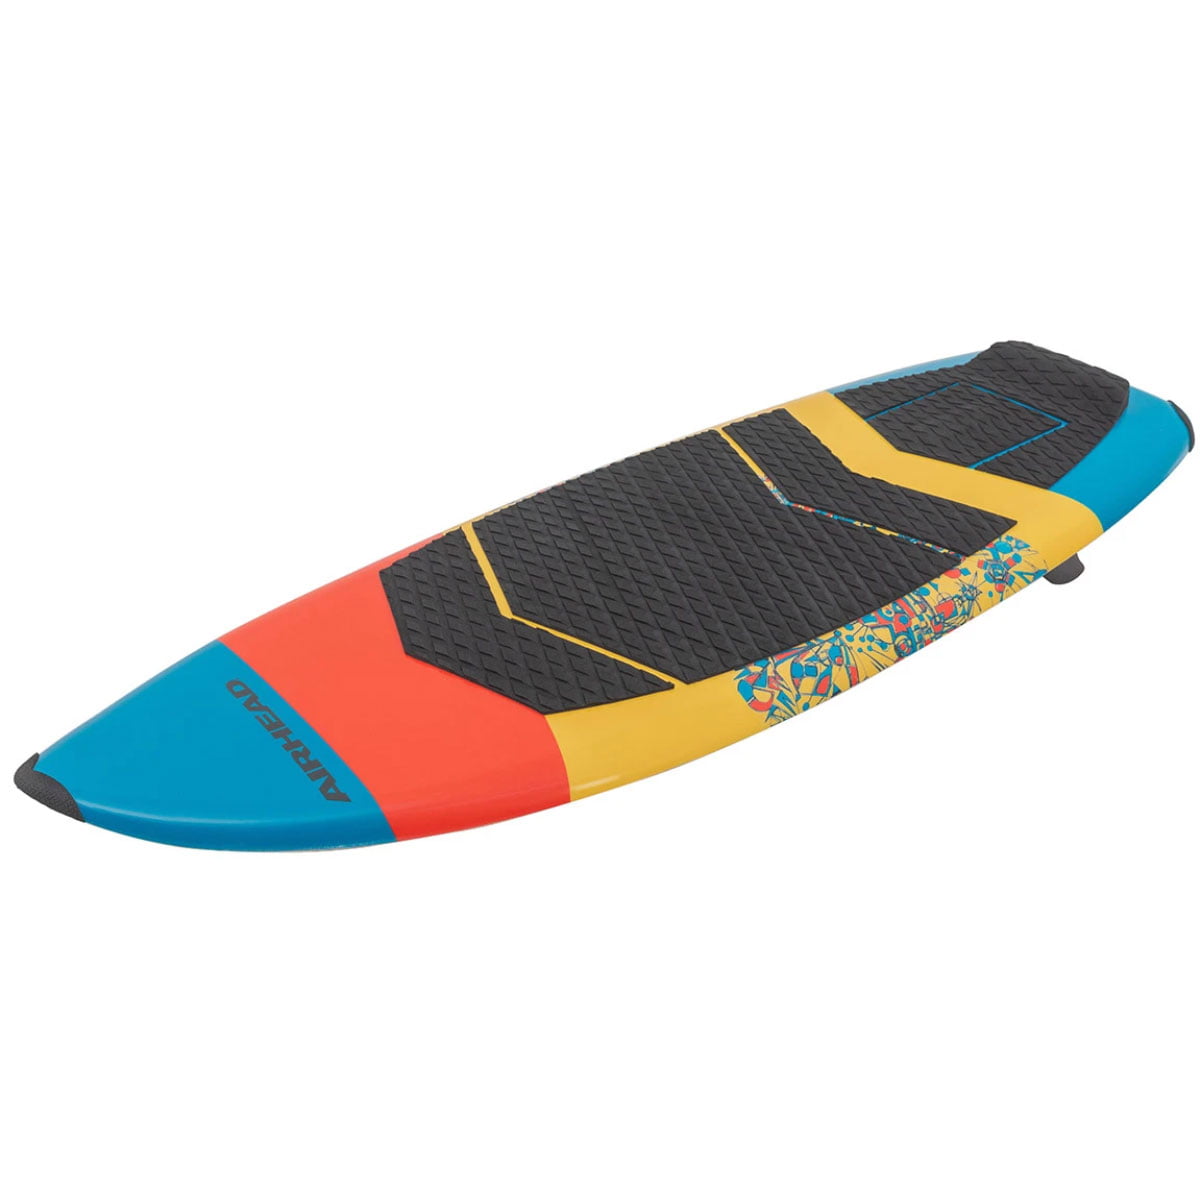 Replacement Futures Fins F4 Quad Setup for Rukus and Throwdown Wakesurf Boards 